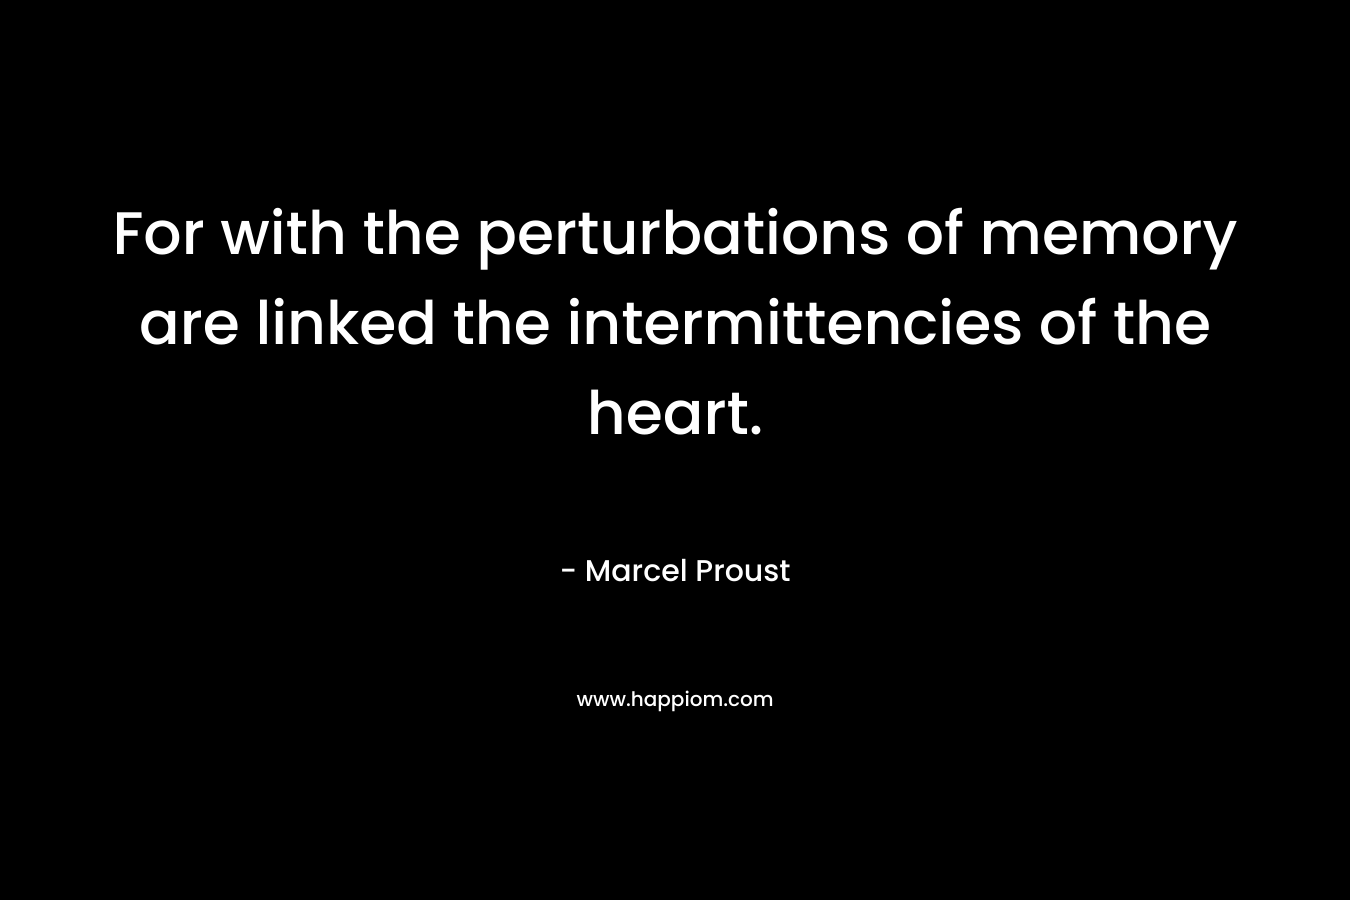 For with the perturbations of memory are linked the intermittencies of the heart. – Marcel Proust